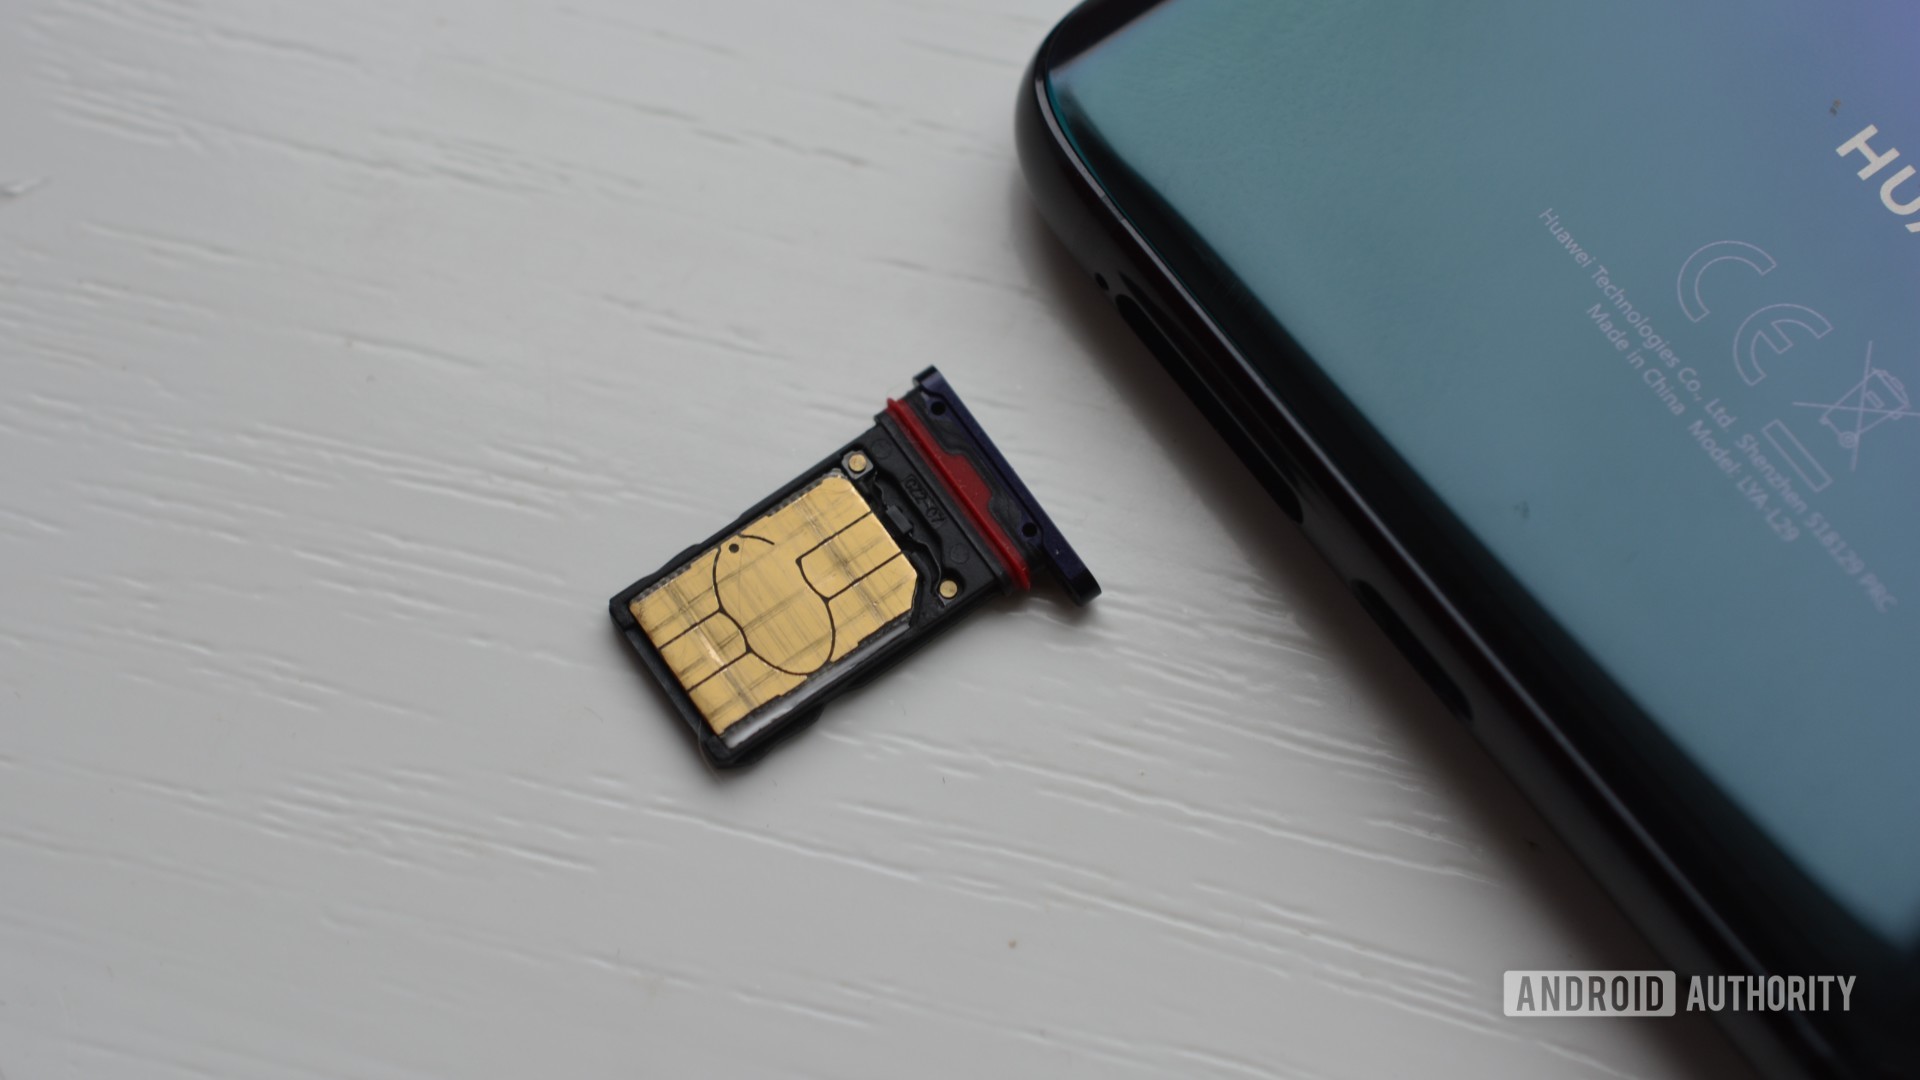 SIM card - Is your messaging app not working?